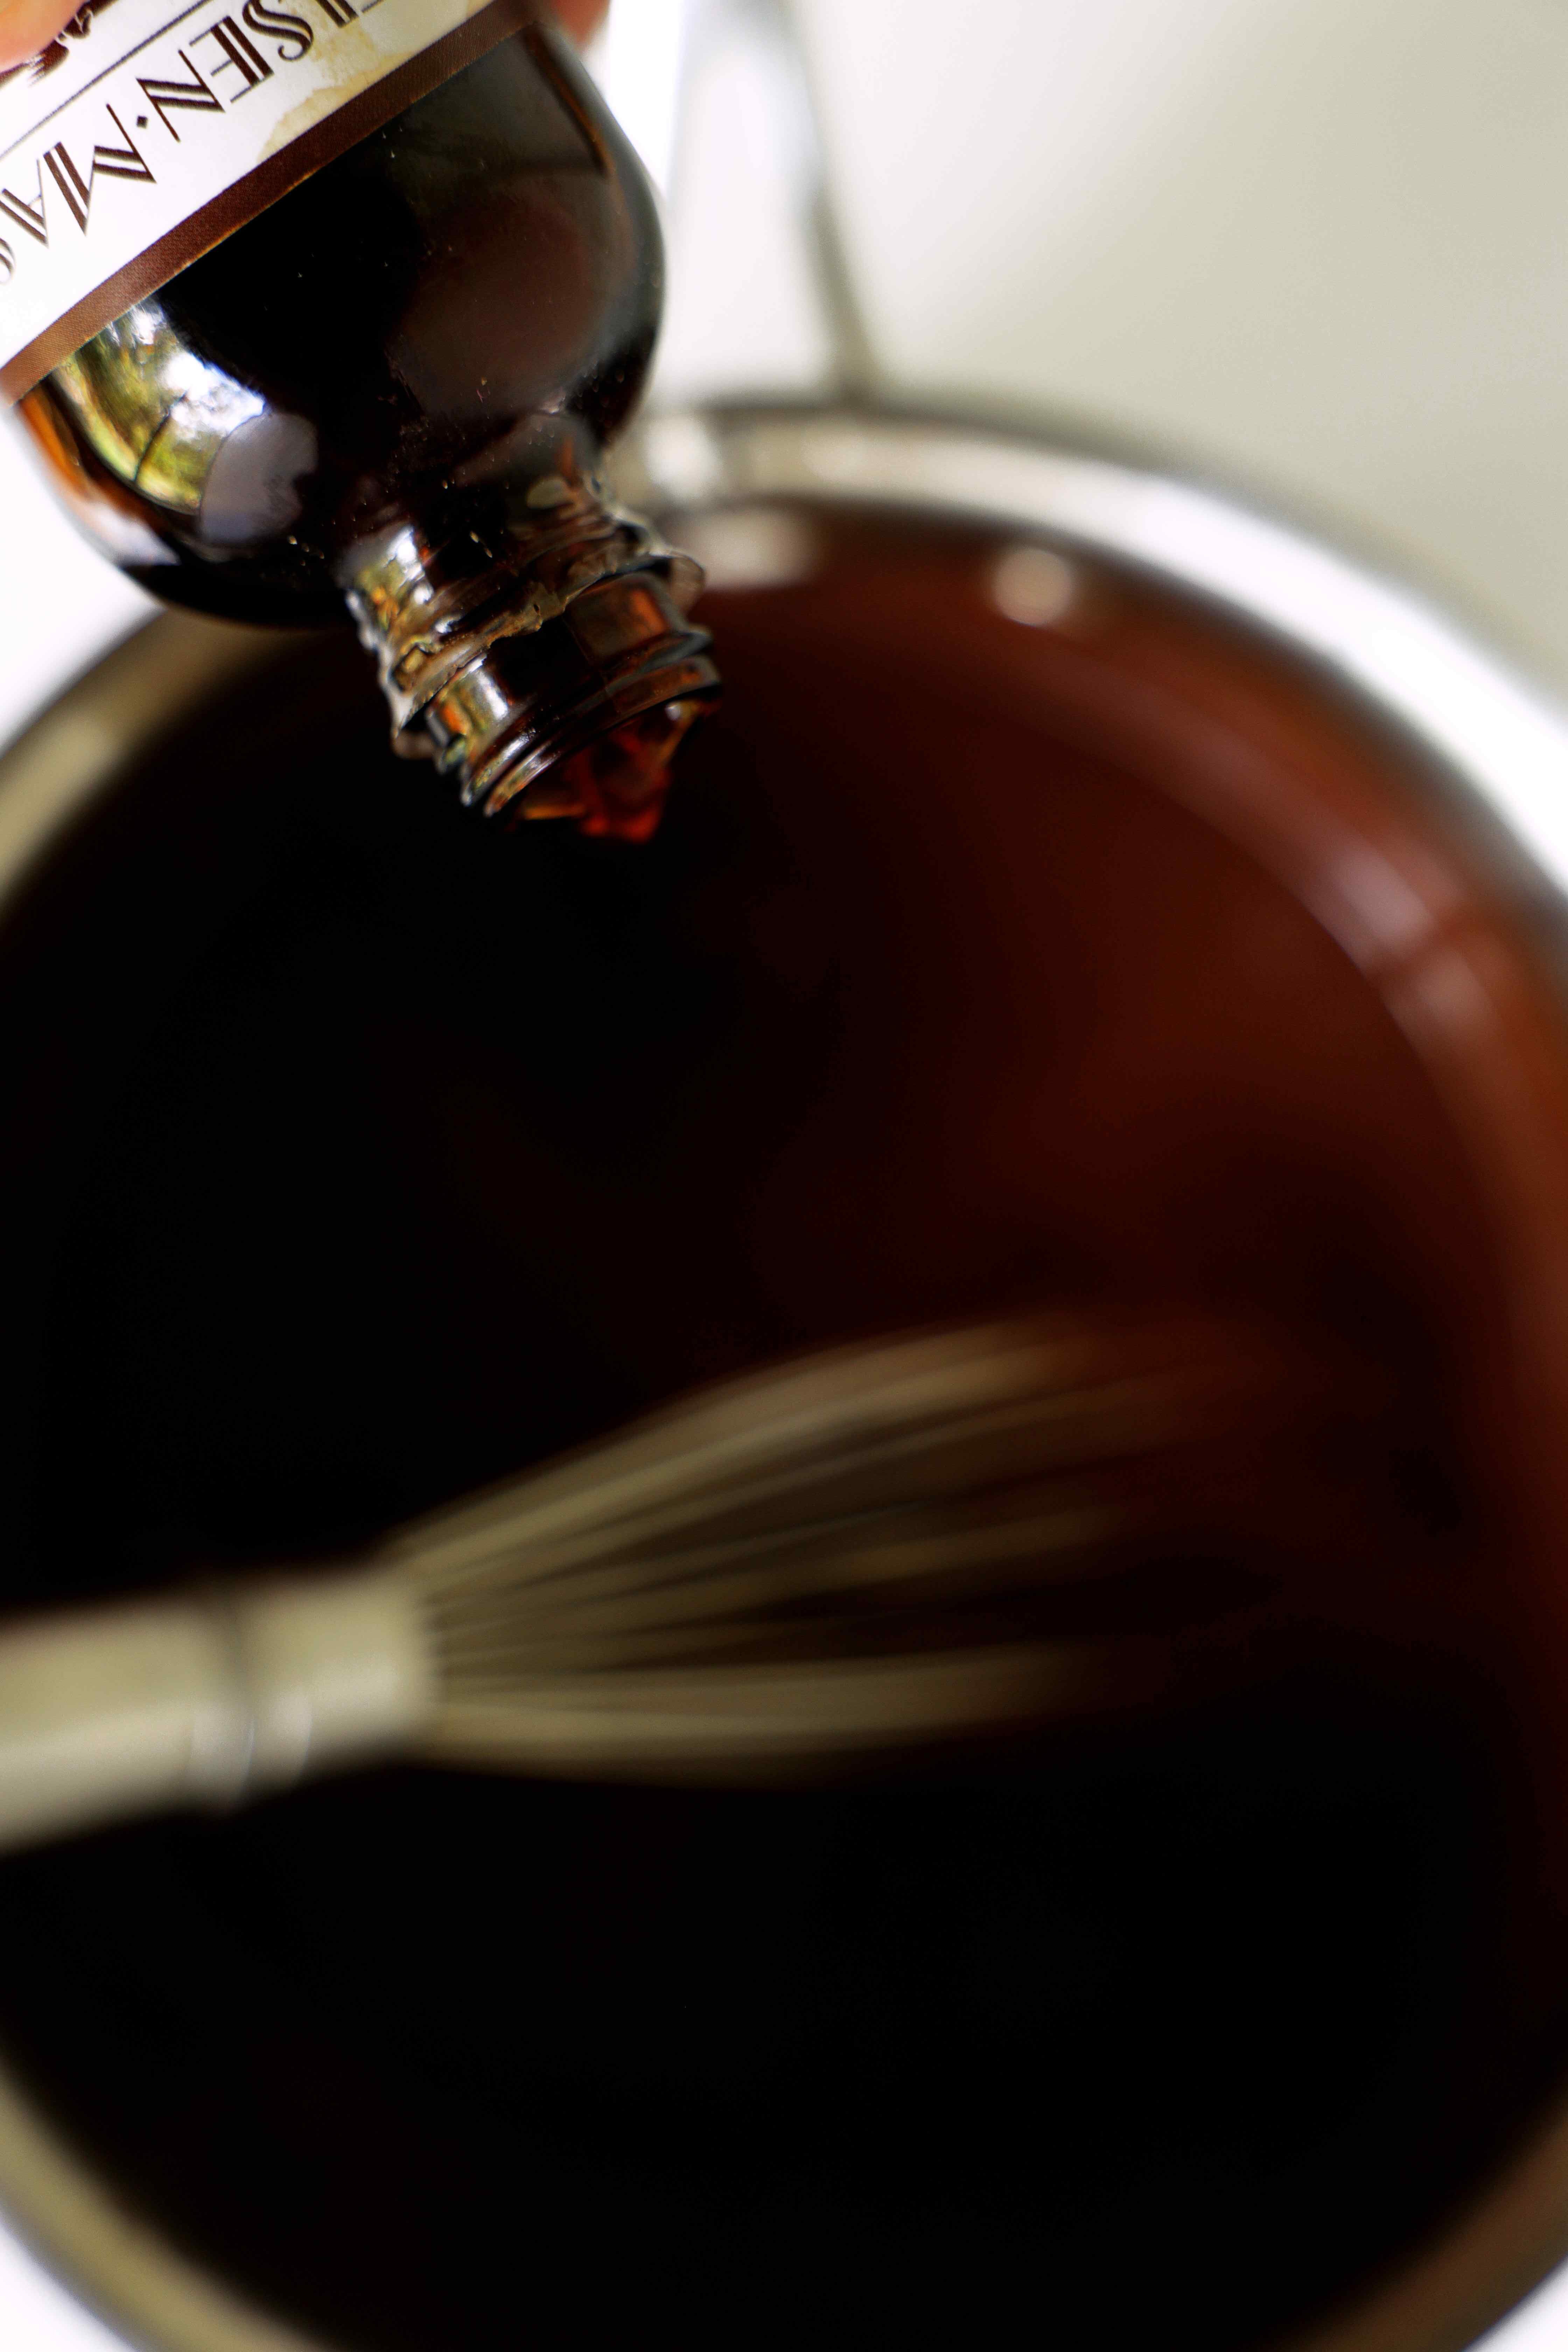 Vanilla extract being poured into the Chocolate Gravy mixture